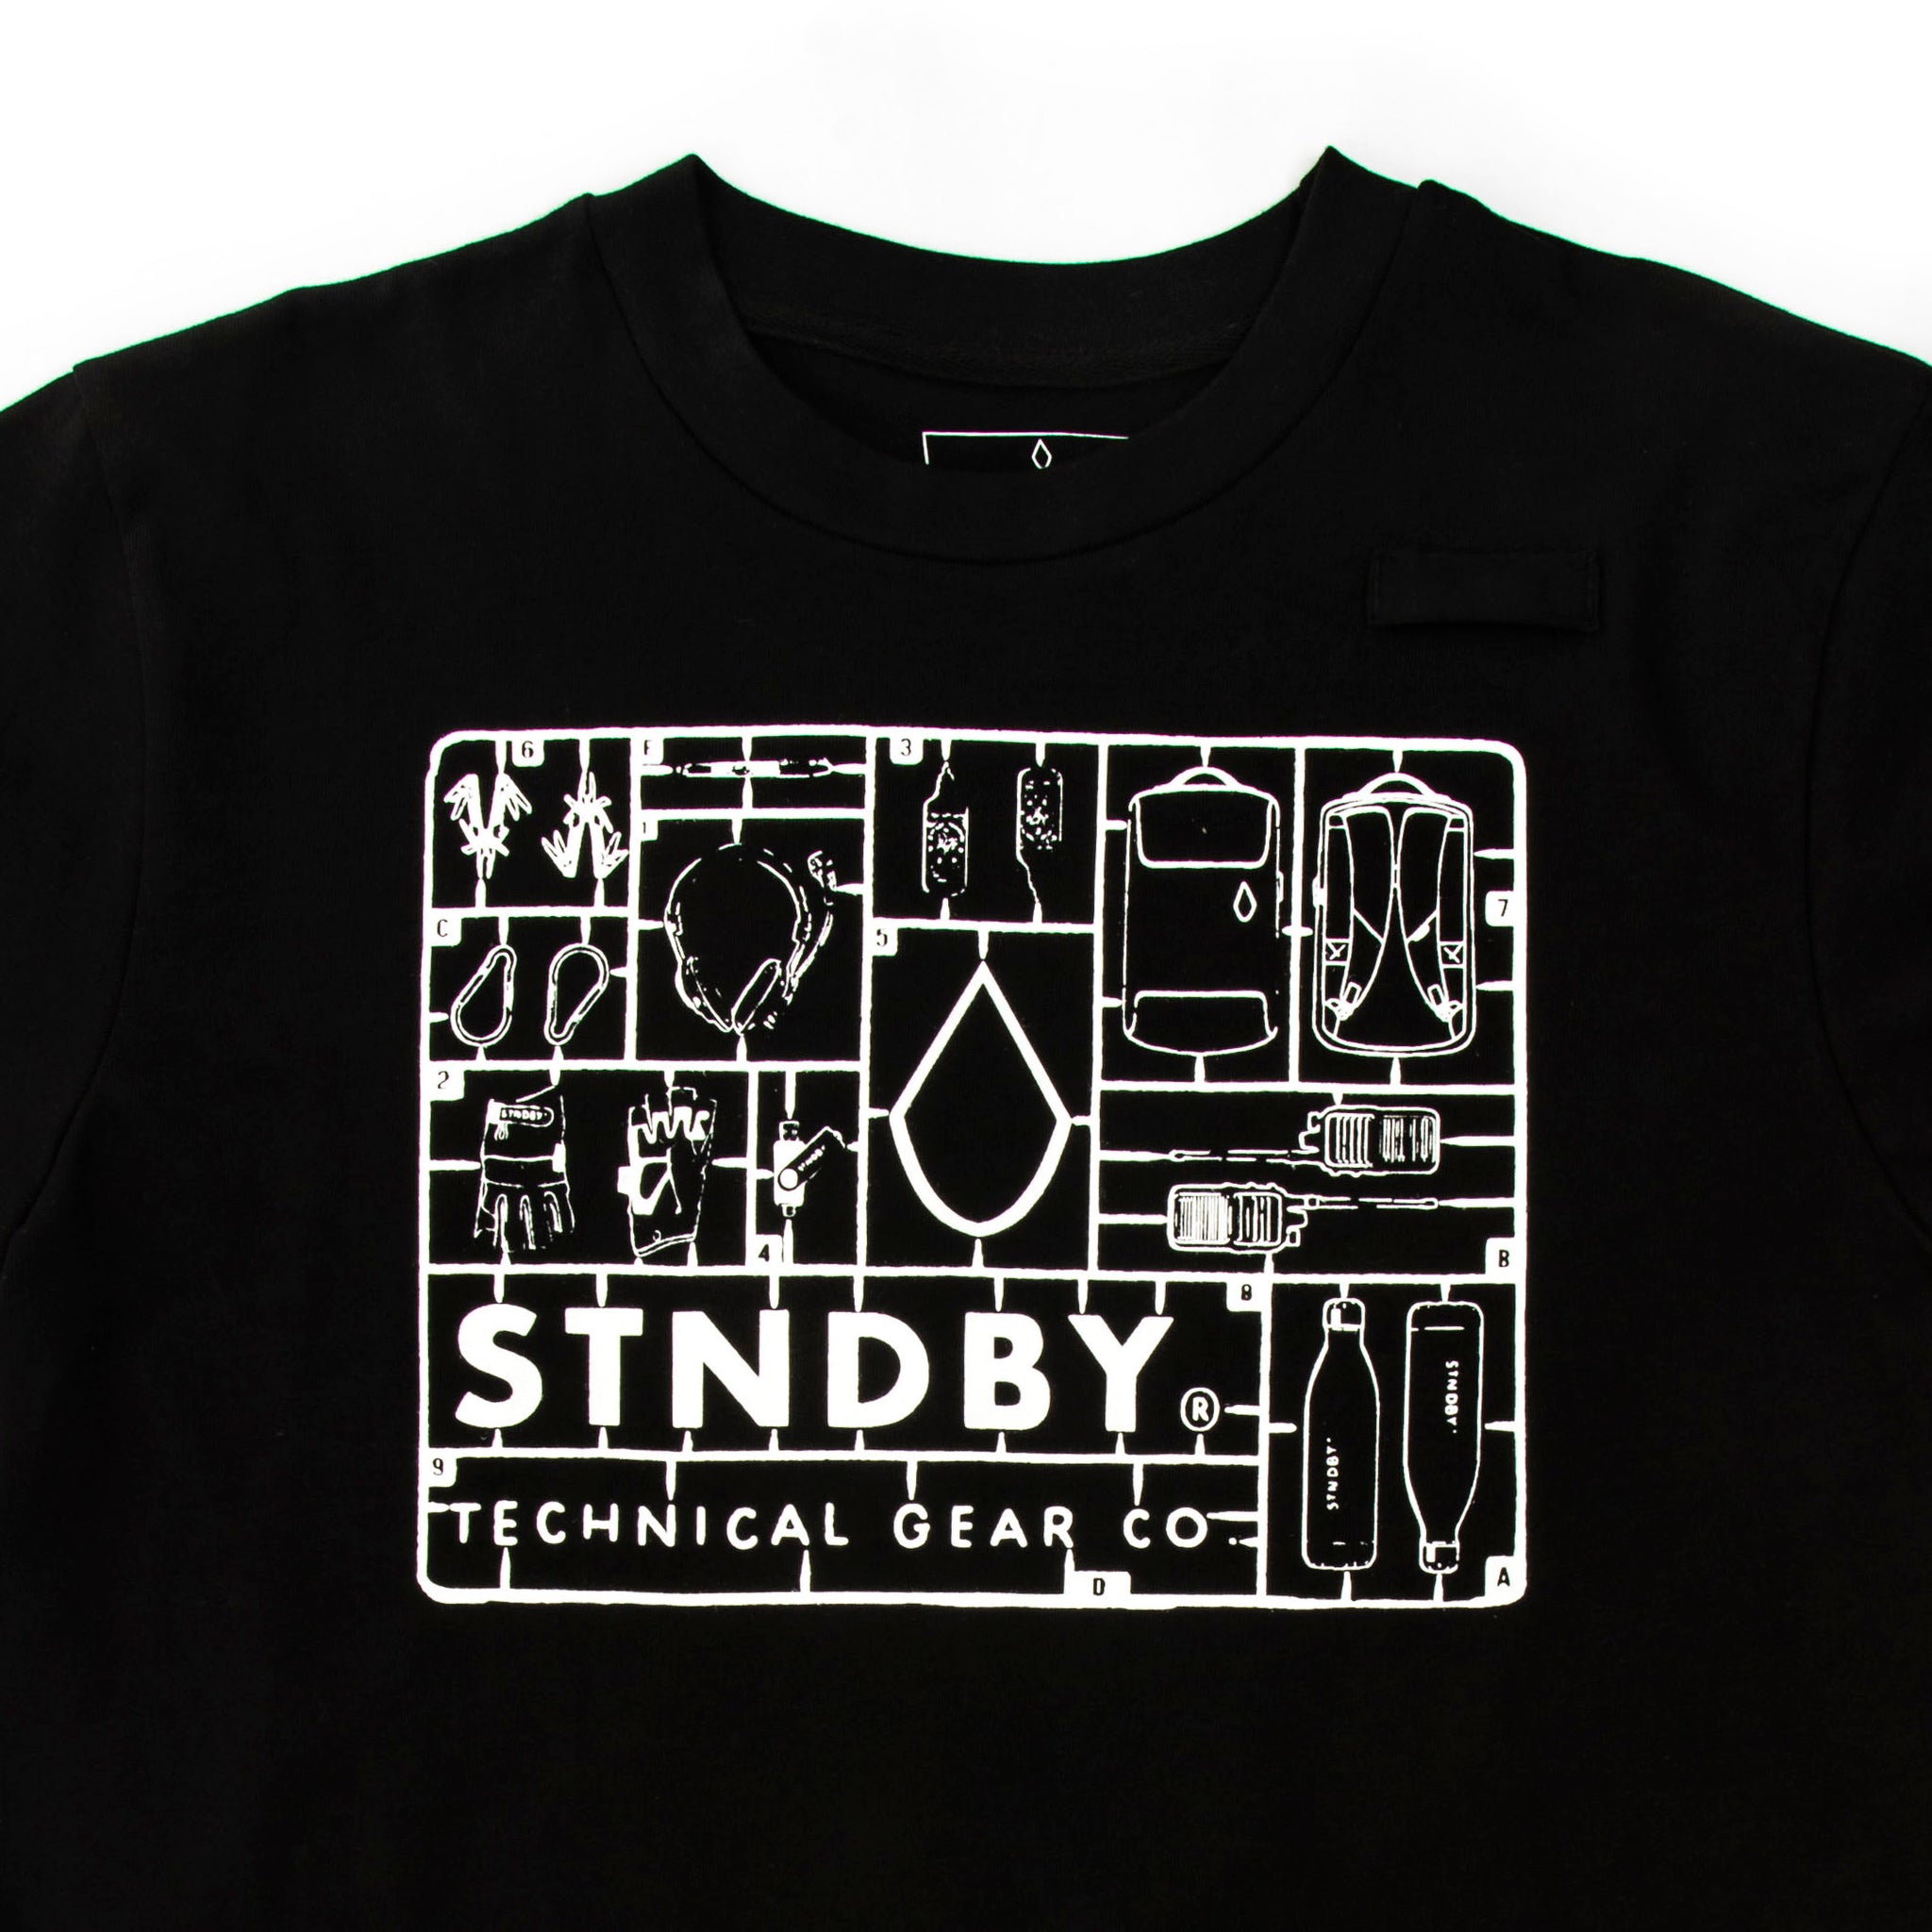 The Original SHOWDAY T-Shirt + MIDNIGHT Carabina (Limited Edition Artist Series - SOLVENT)